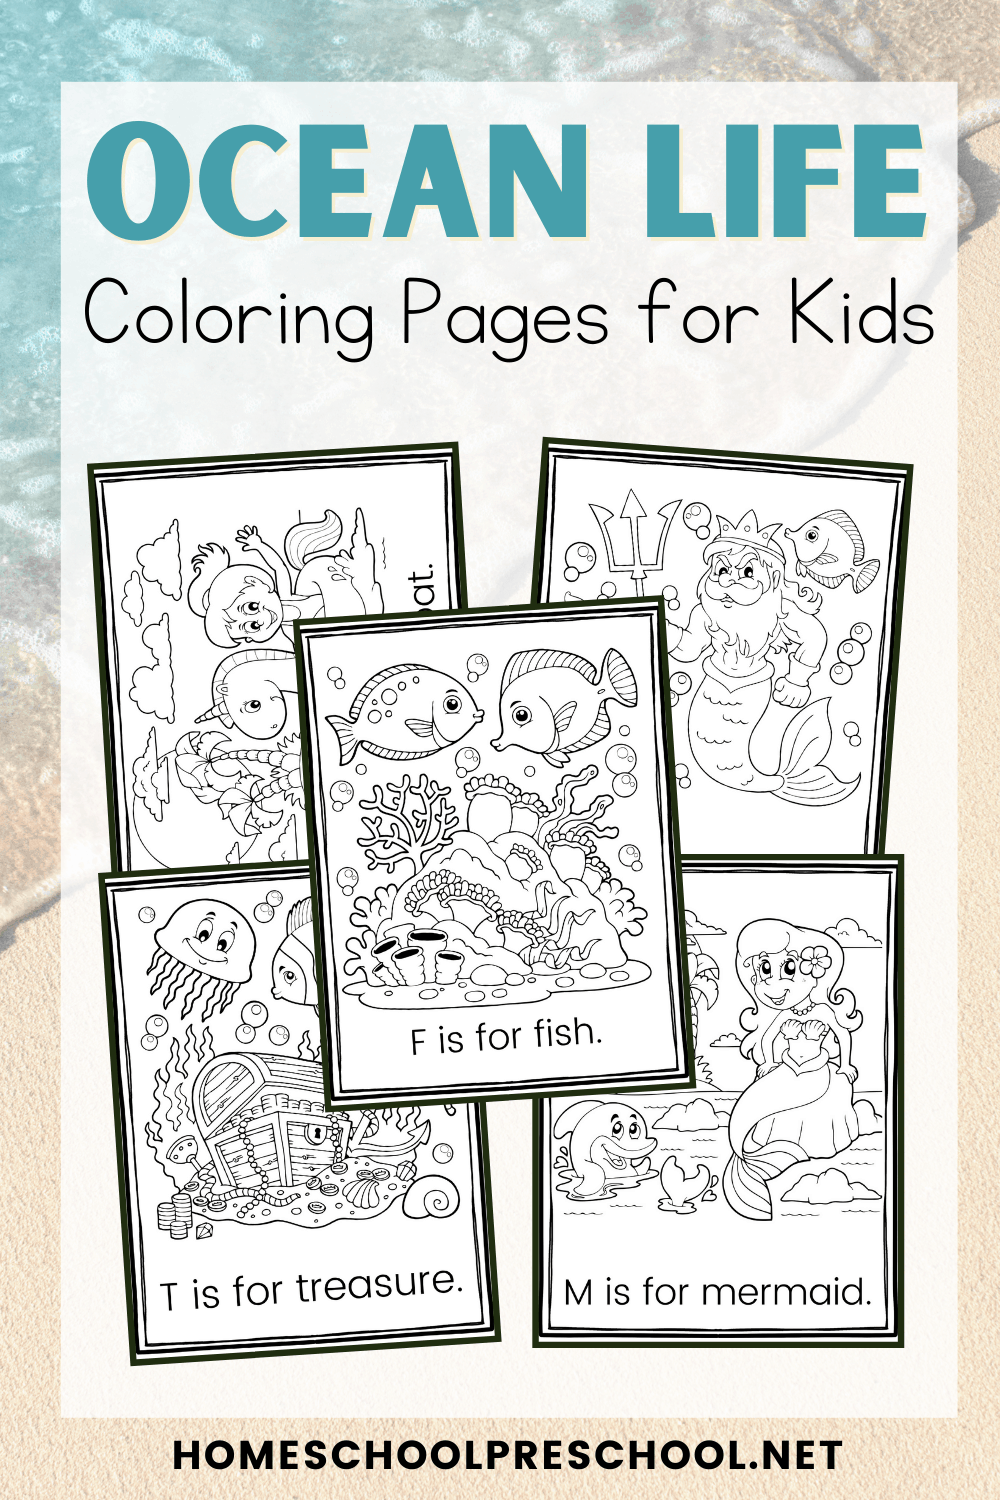 Ocean Life Coloring Pages